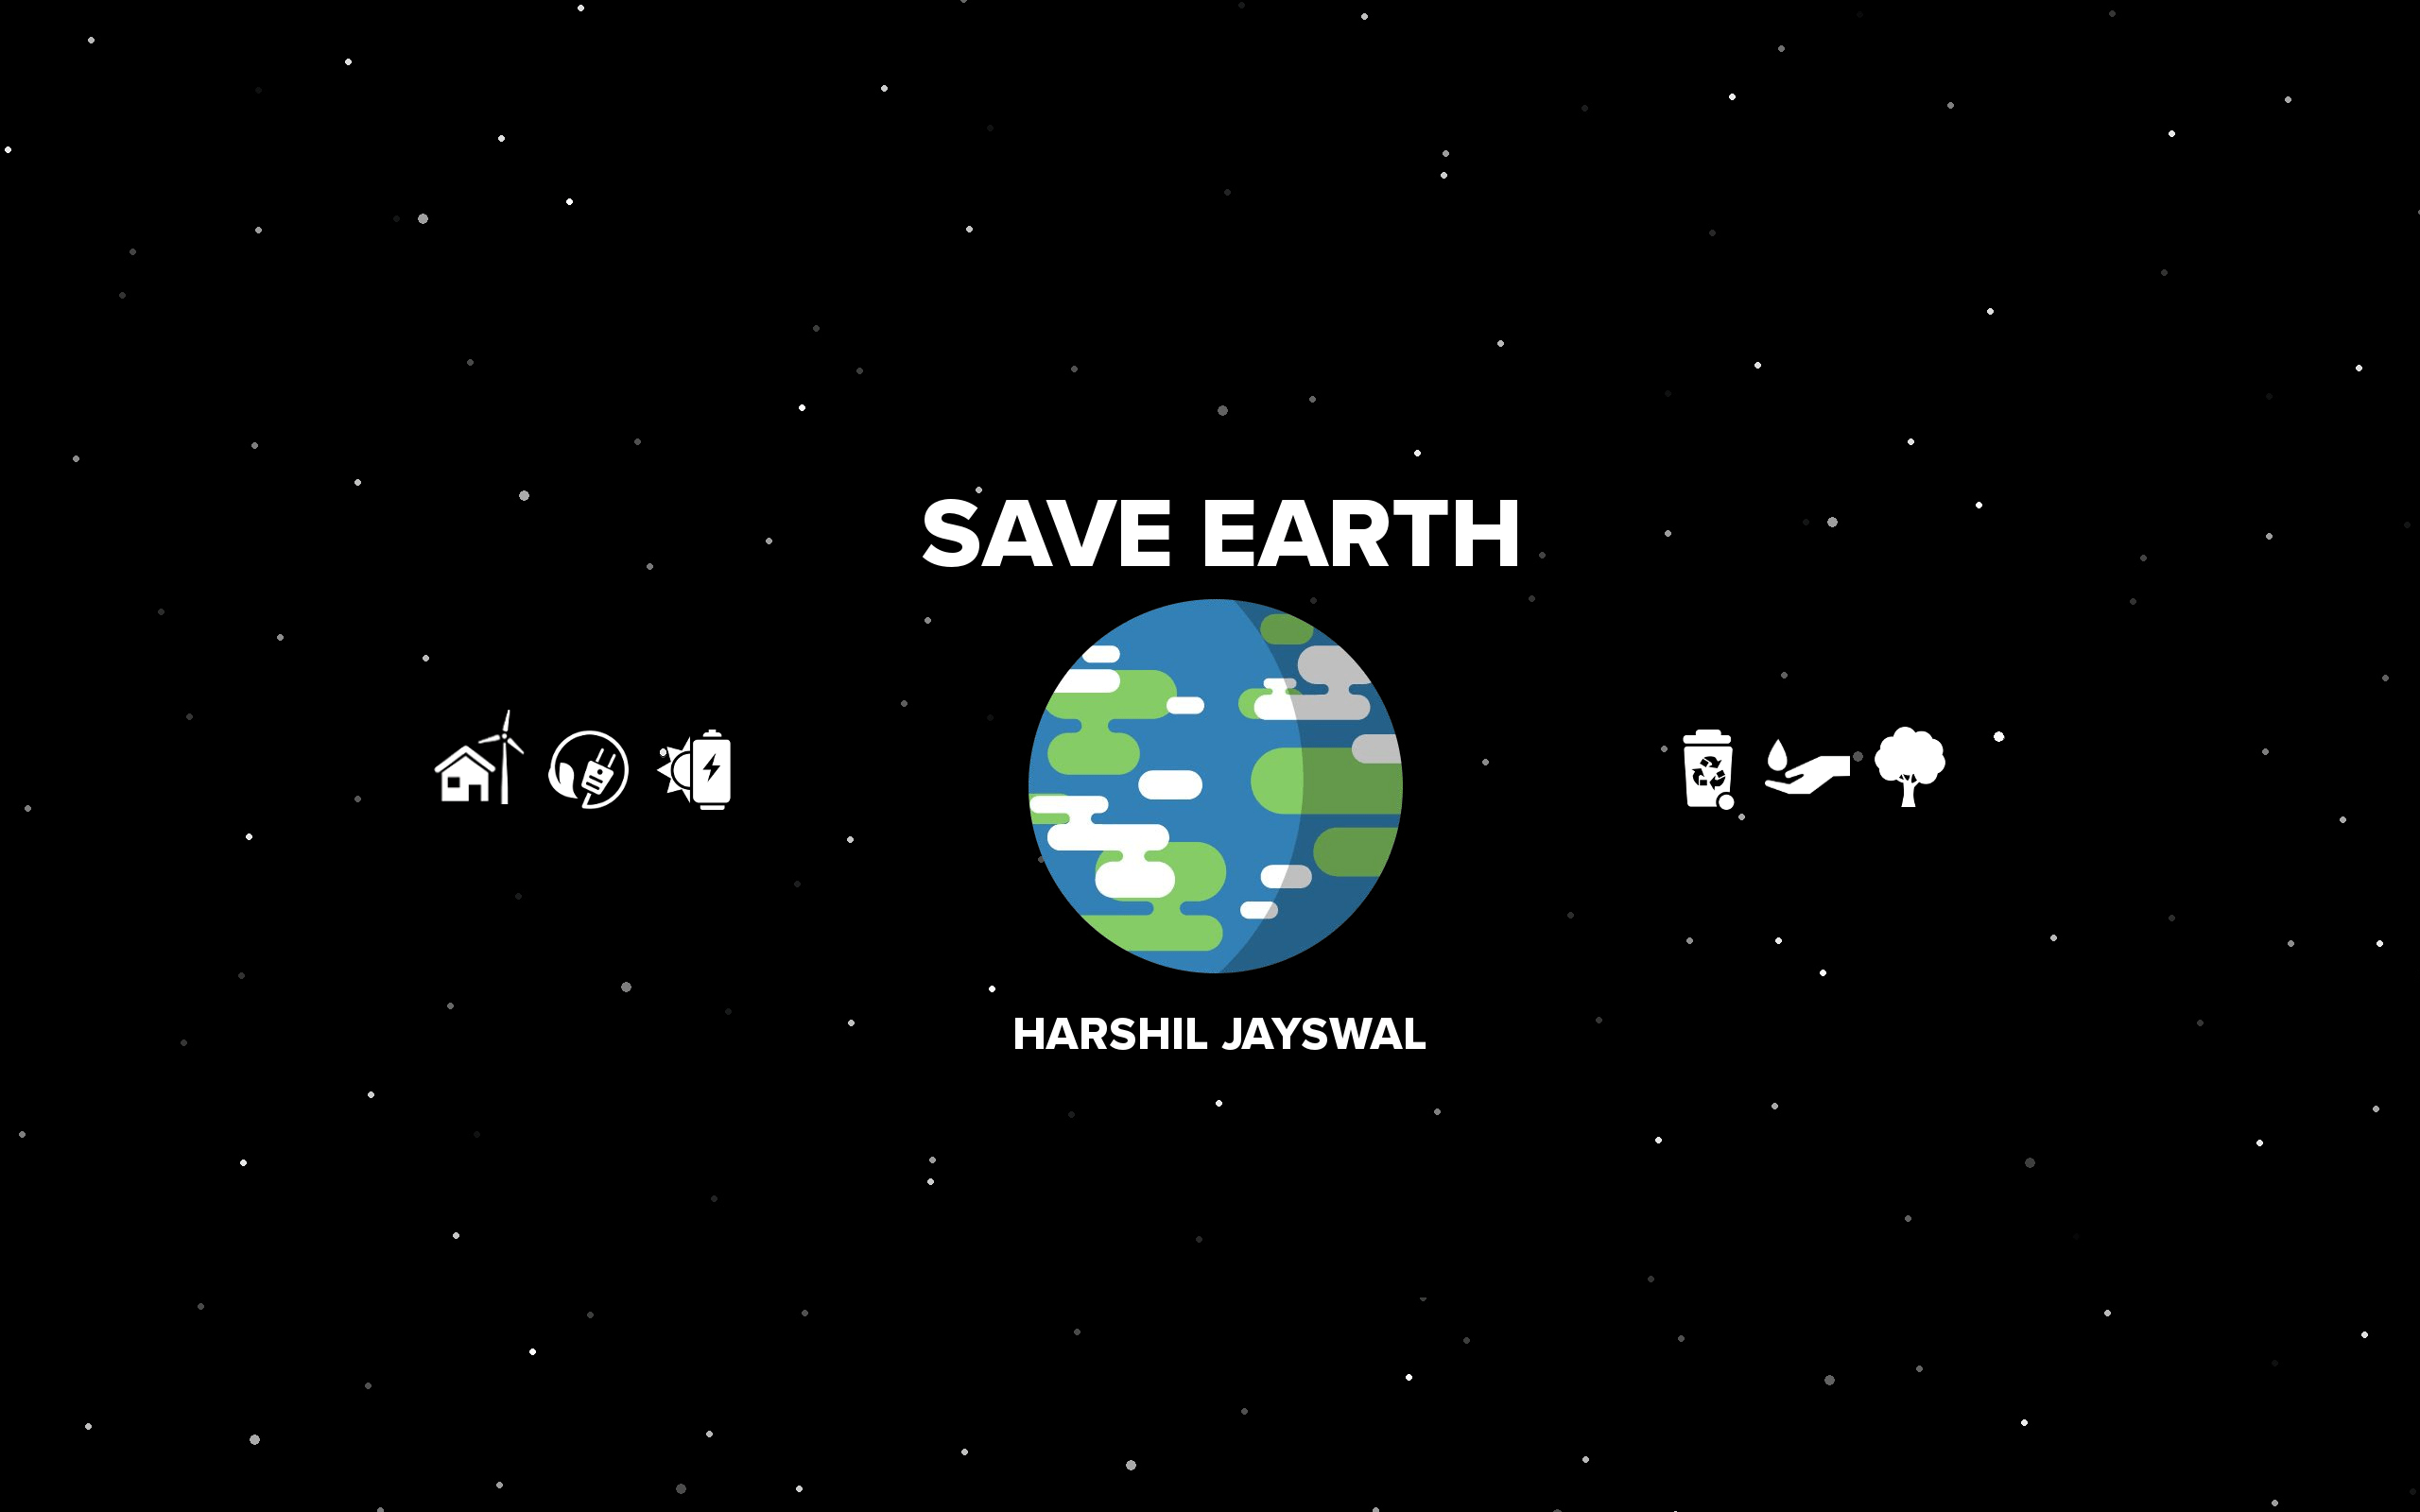 Made A Save Earth Wallpaper For My Desktop Wallpaper